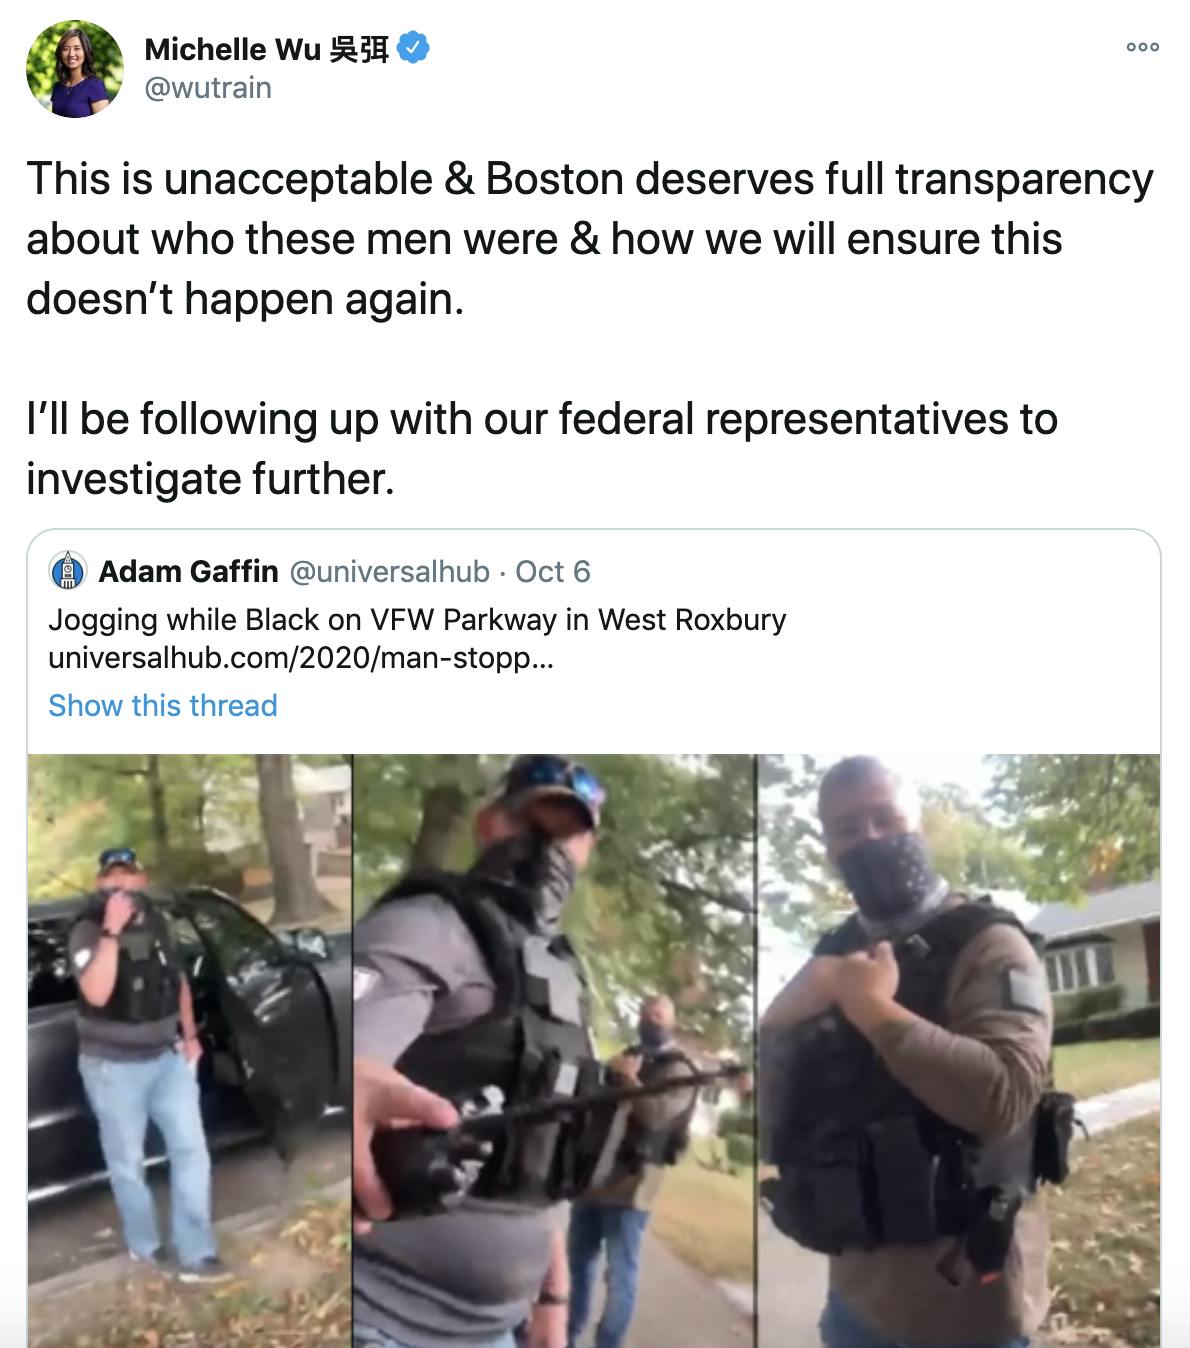 This is unacceptable & Boston deserves full transparency about who these men were & how we will ensure this doesn’t happen again. I’ll be following up with our federal representatives to investigate further.